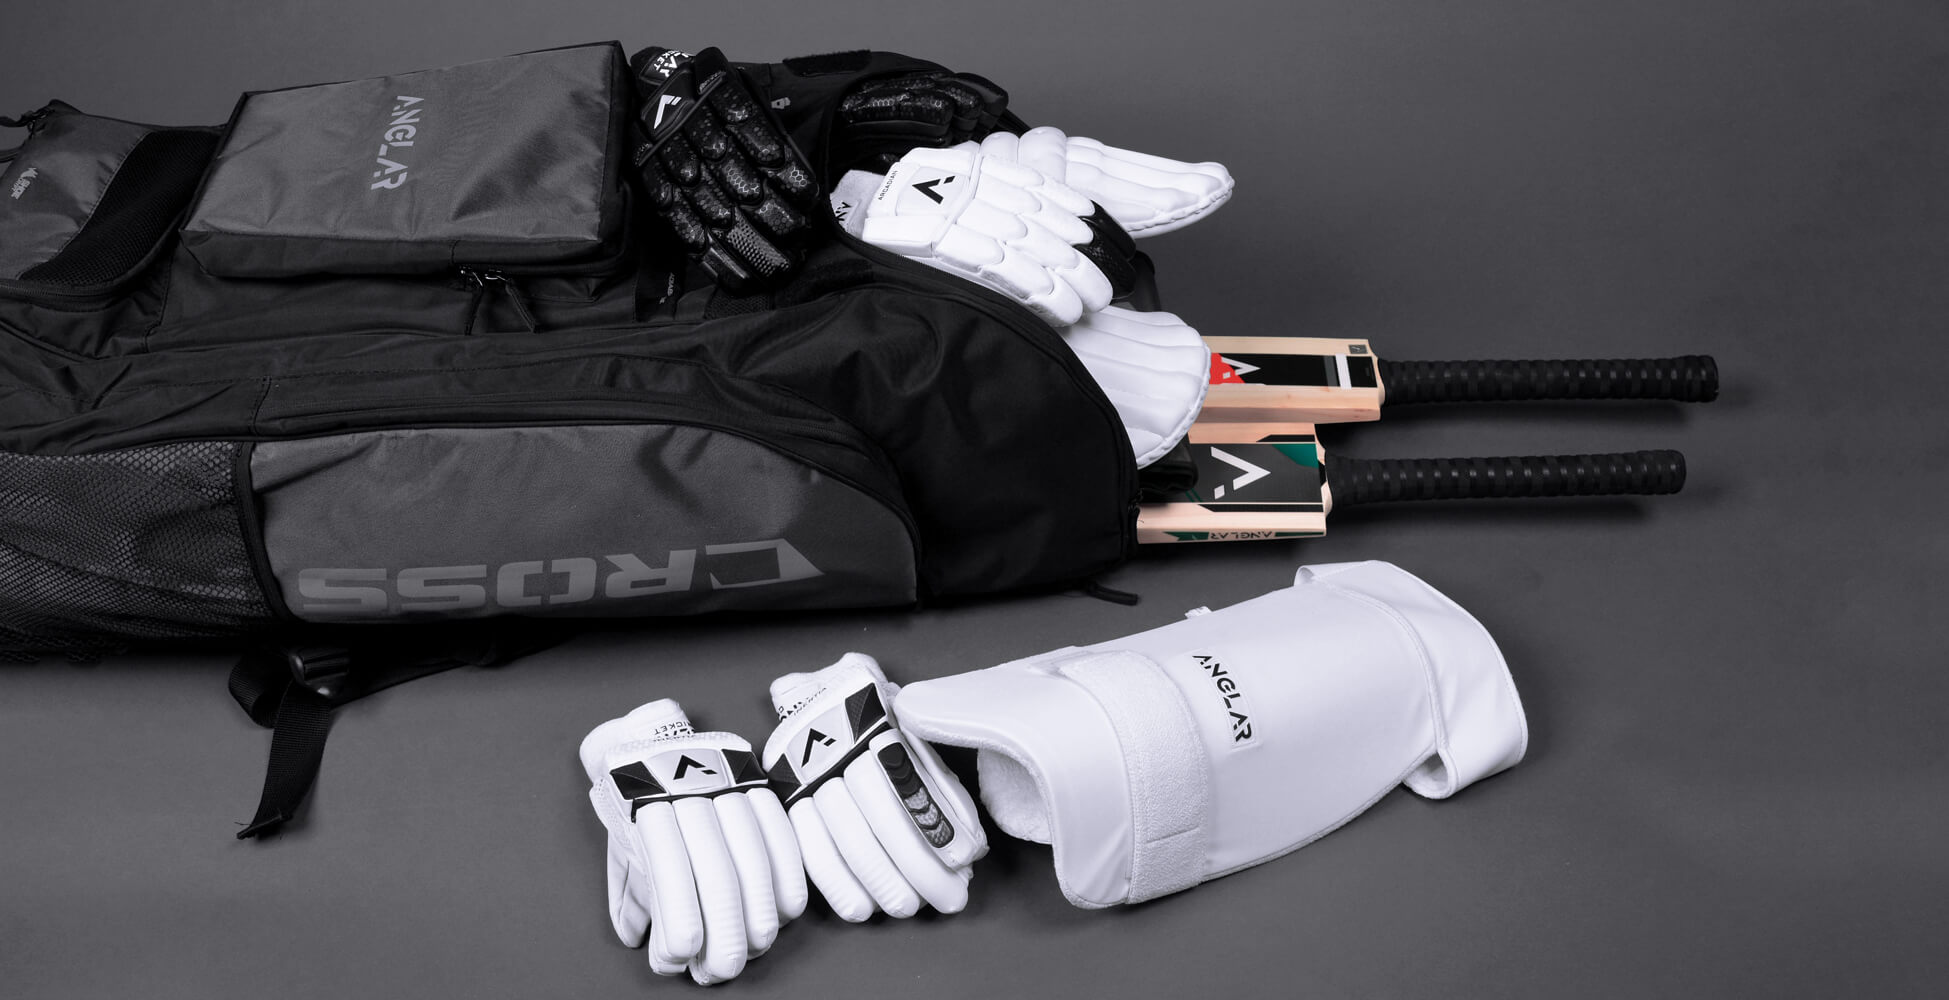 10 Things You Should Have in Your Cricket Kit